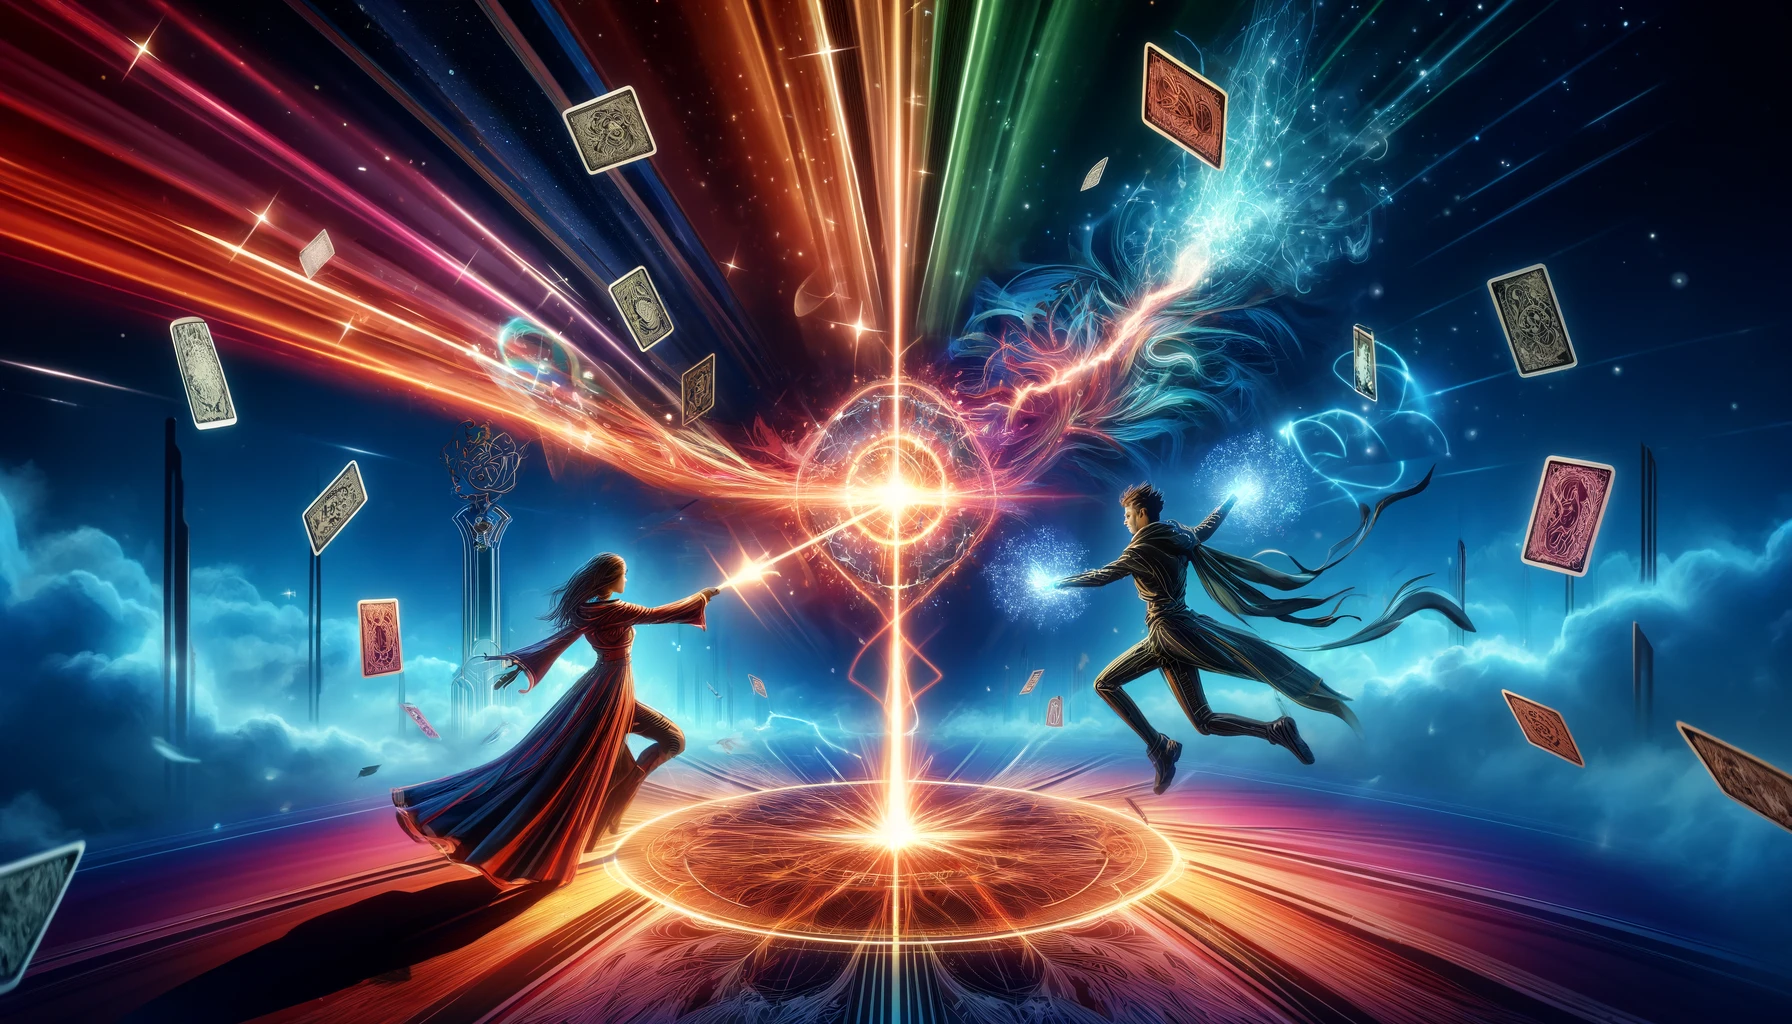 Two dynamic characters channel energy into a powerful beam, surrounded by strategic Marvel Snap cards in a vibrant, mystical setting.